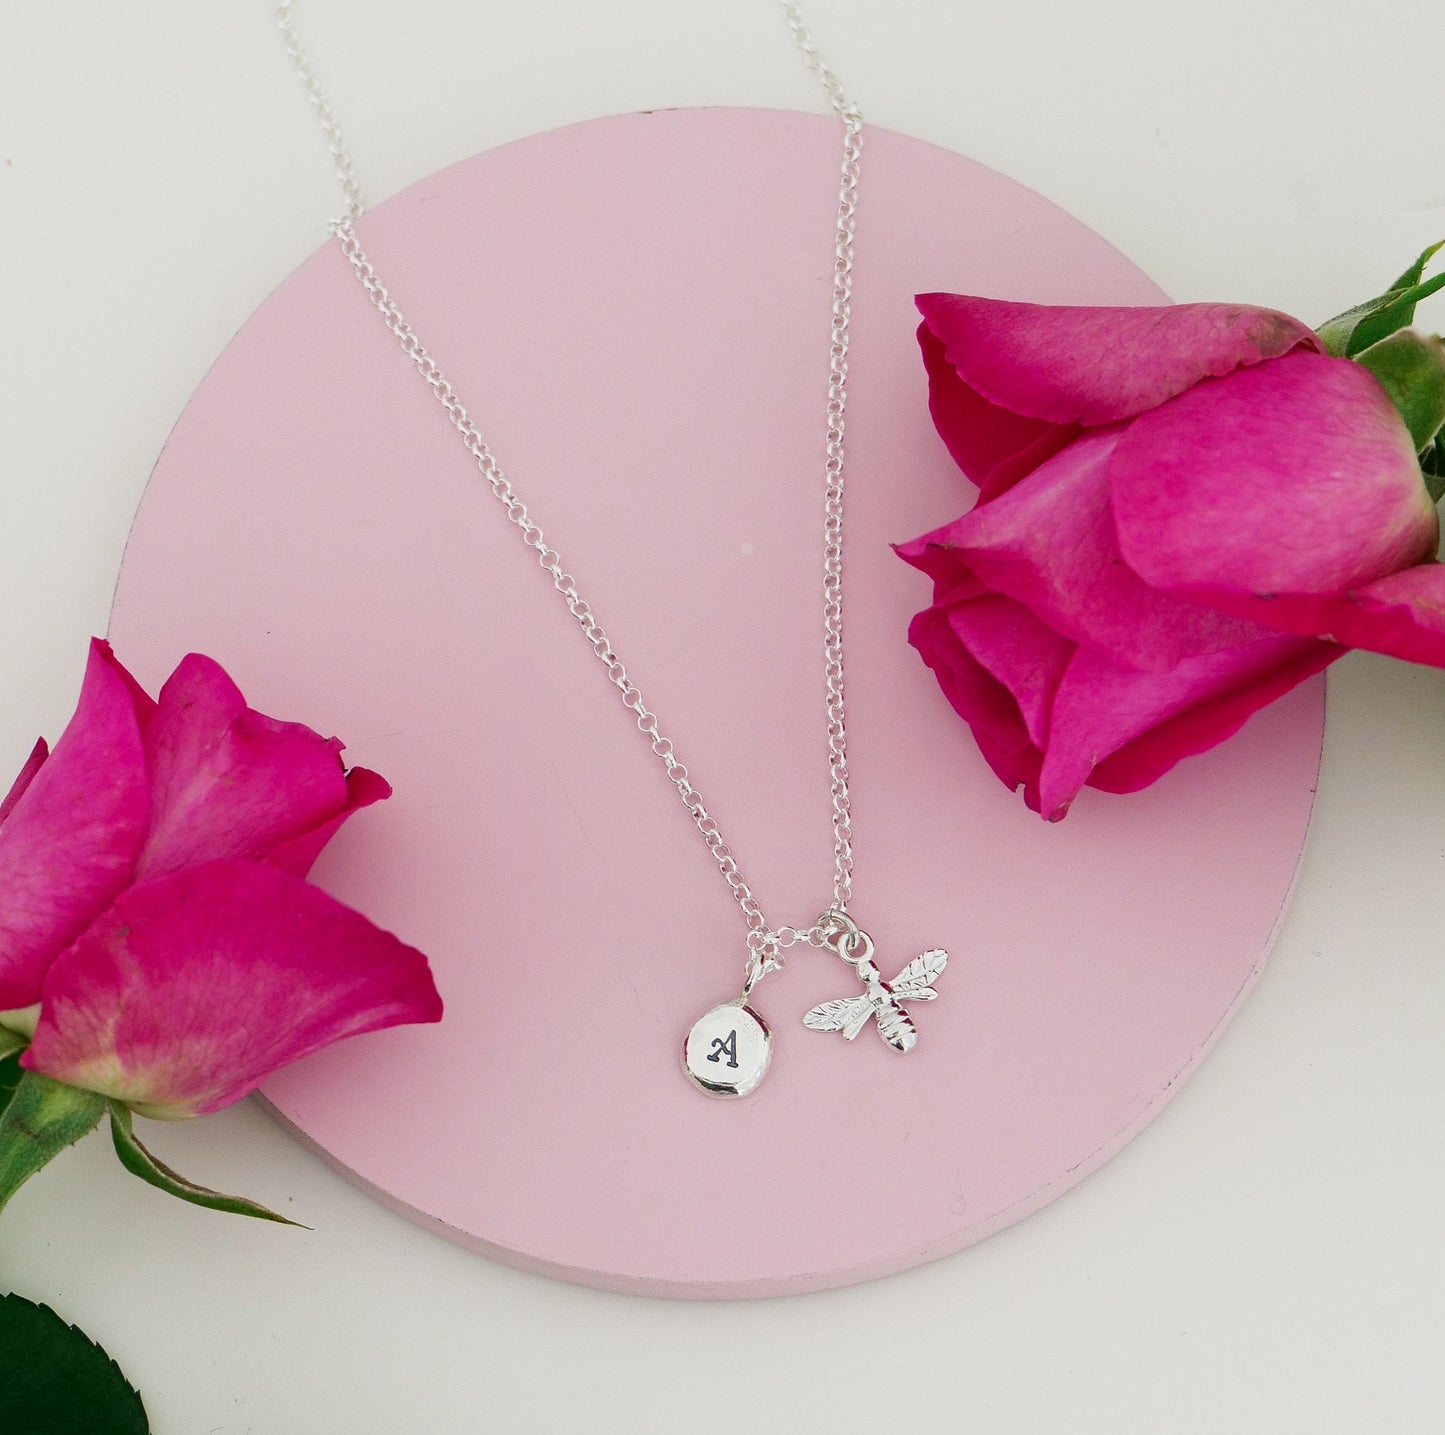 Personalised Honey Bee Necklace